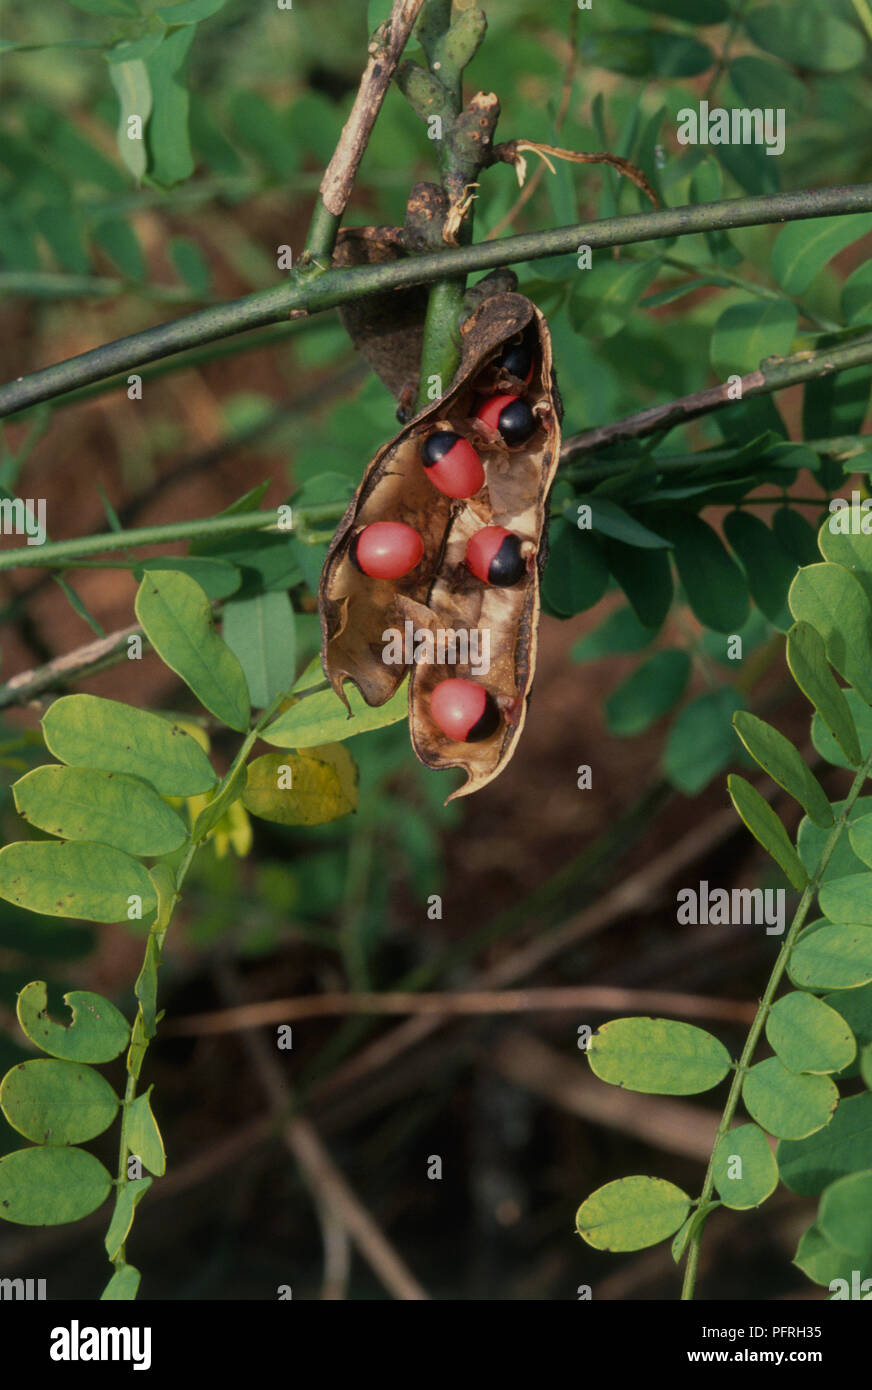 Abrus precatorius (Jequirity, Crab's Eye) showing pinnate green leaves and long pod containing red, black-tipped seeds, close-up Stock Photo